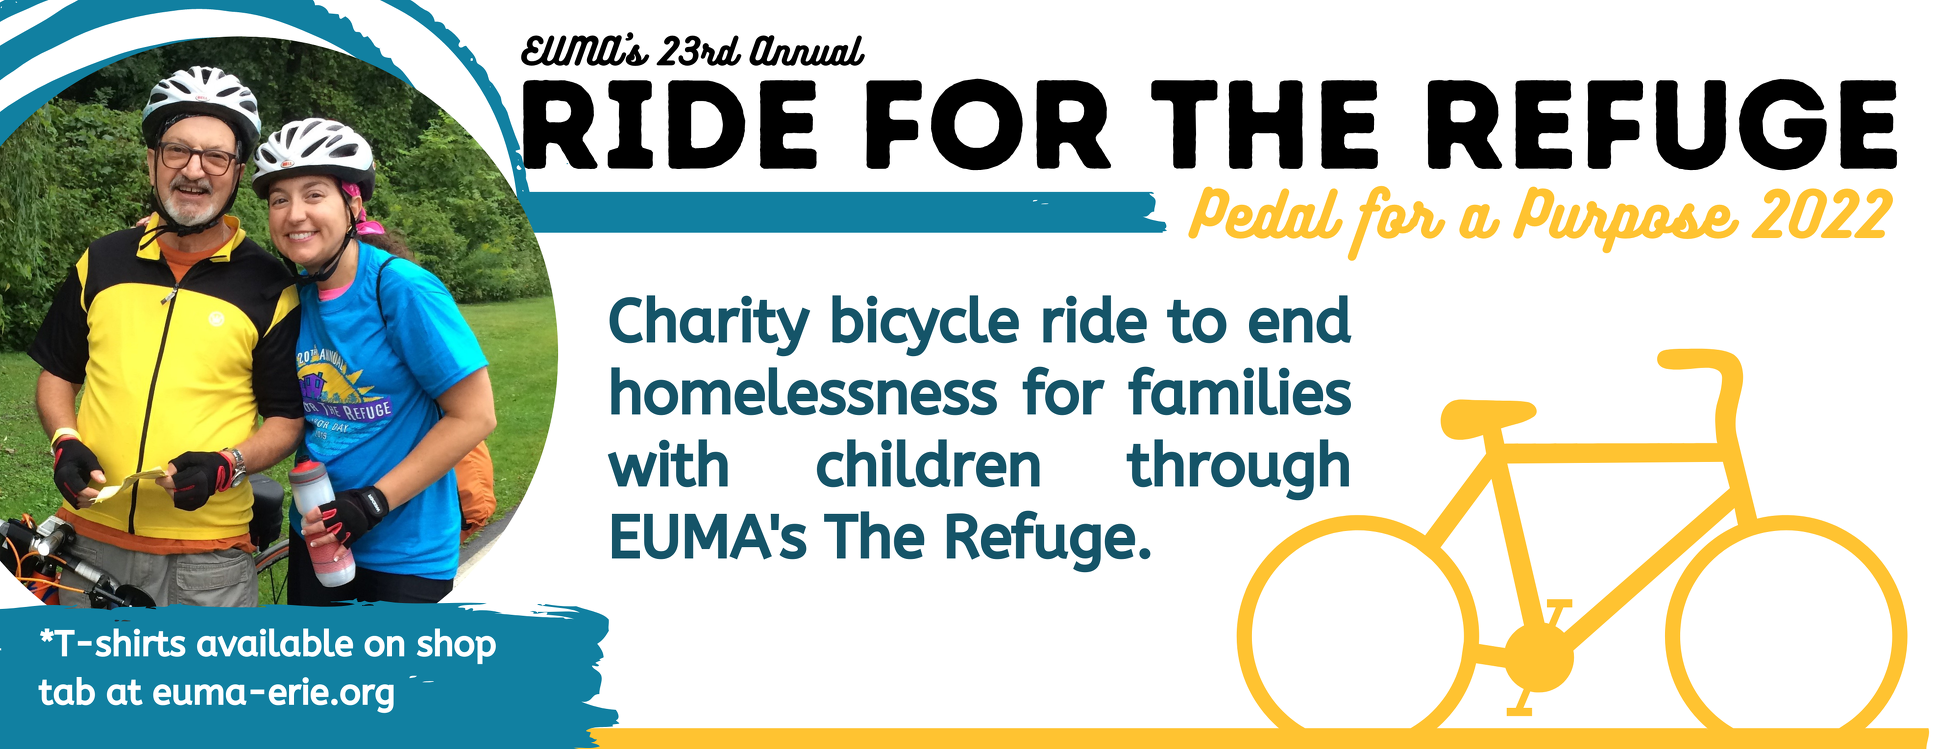 2022 Ride for the Refuge